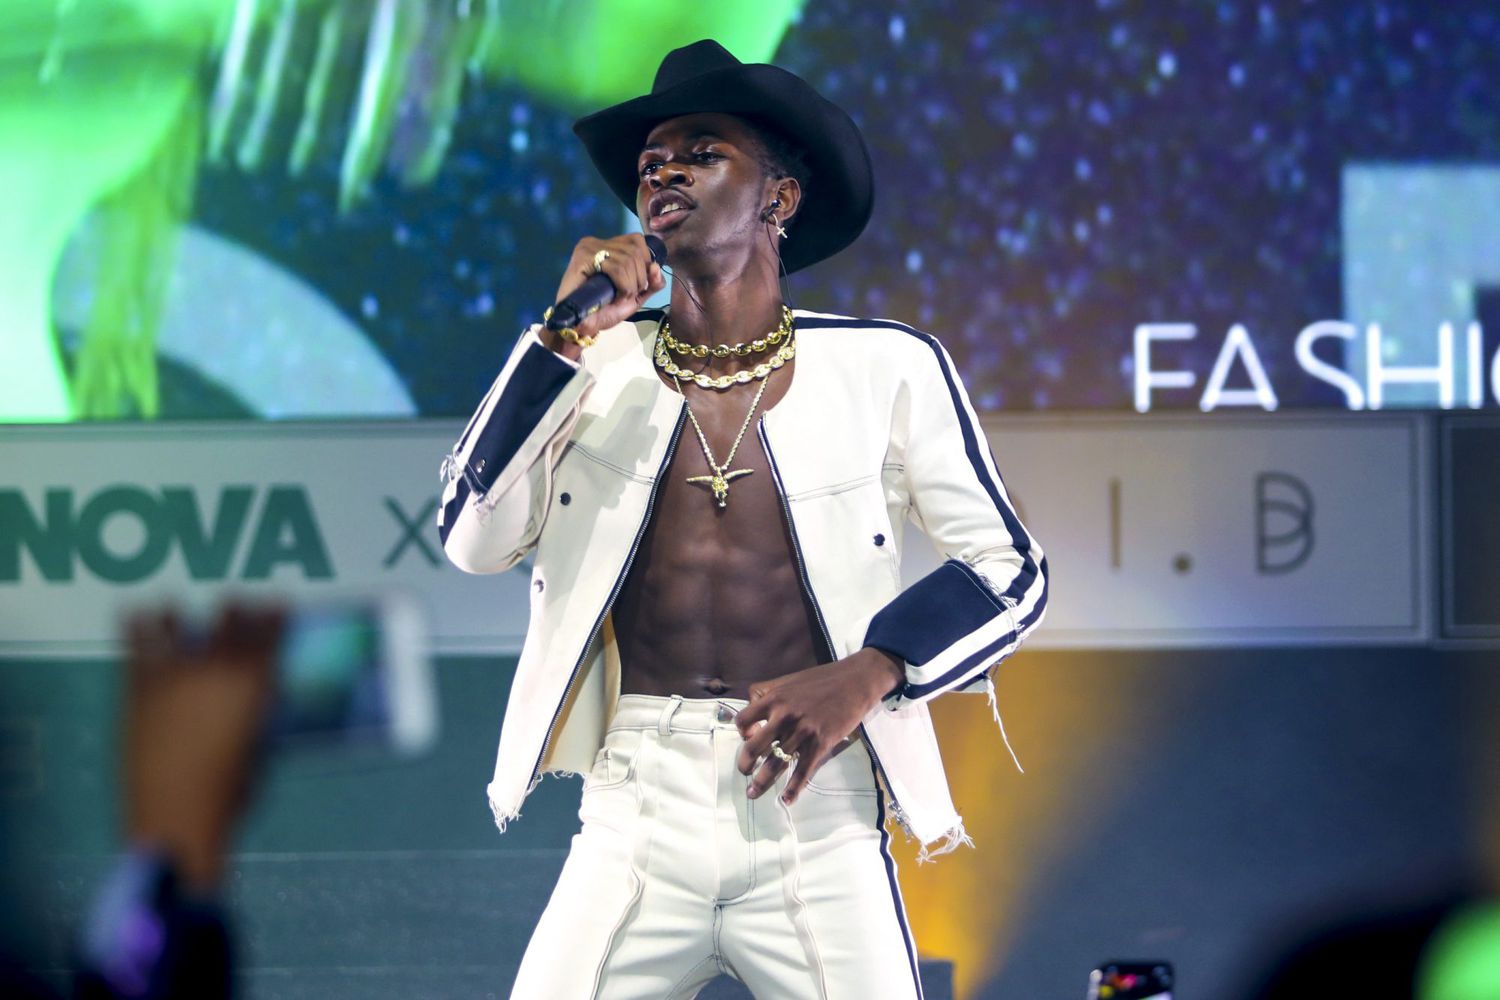 LOS ANGELES, CA - MAY 09: Lil Nas X performs onstage as Fashion Nova Presents: Party With Cardi at Hollywood Palladium on May 9, 2019 in Los Angeles, California. (Photo by Jerritt Clark/Getty Images for Fashion Nova)